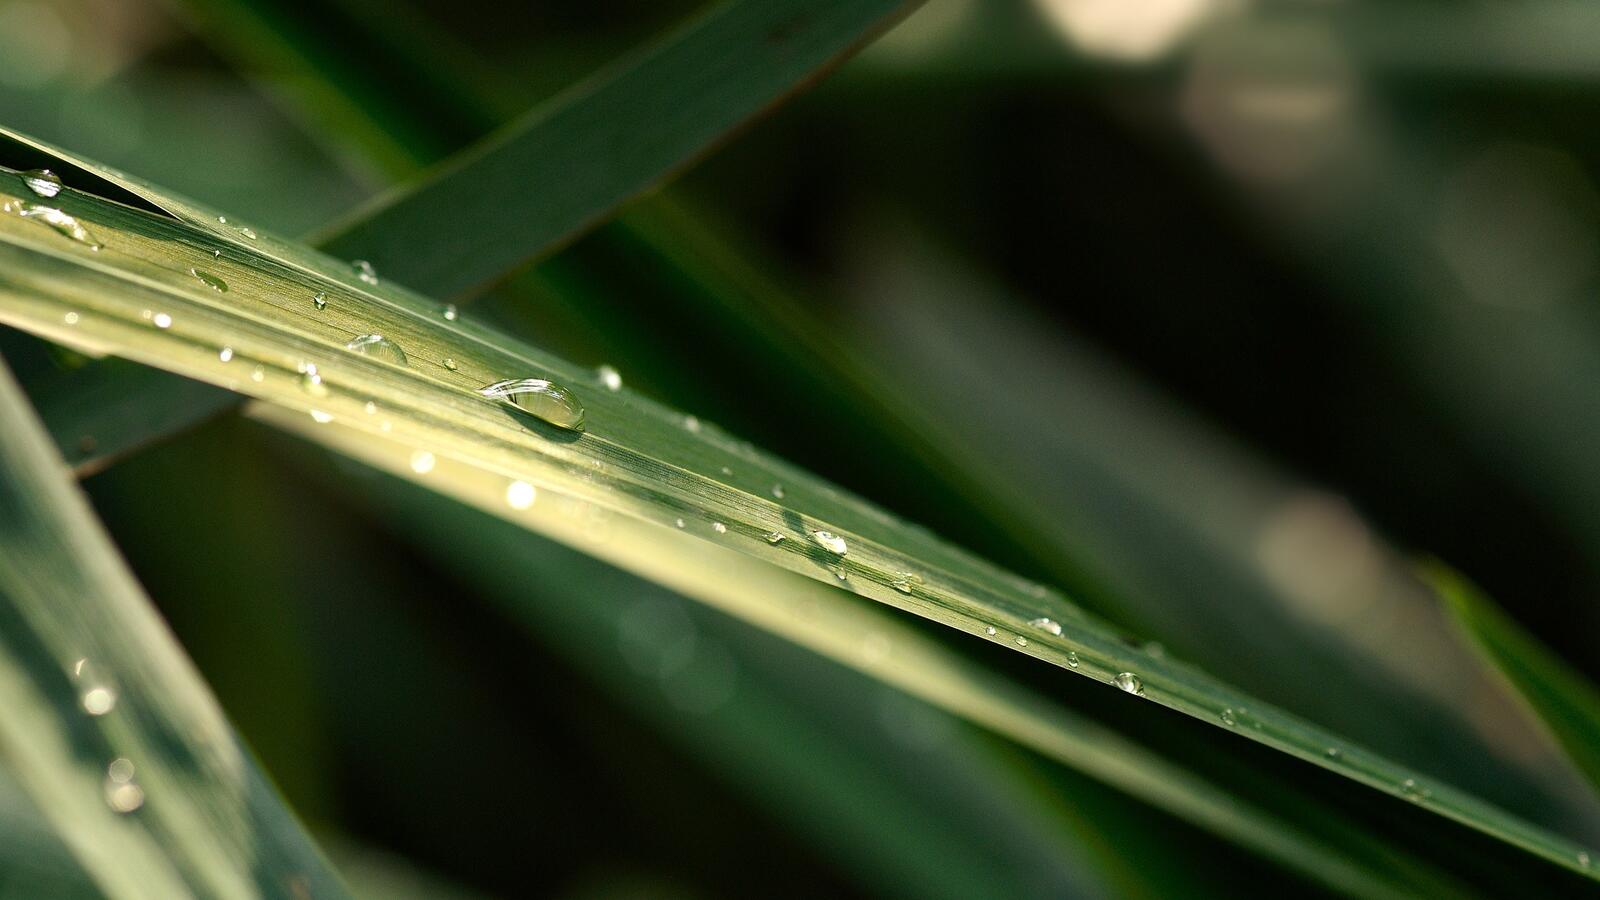 Free photo Green grass with water drops